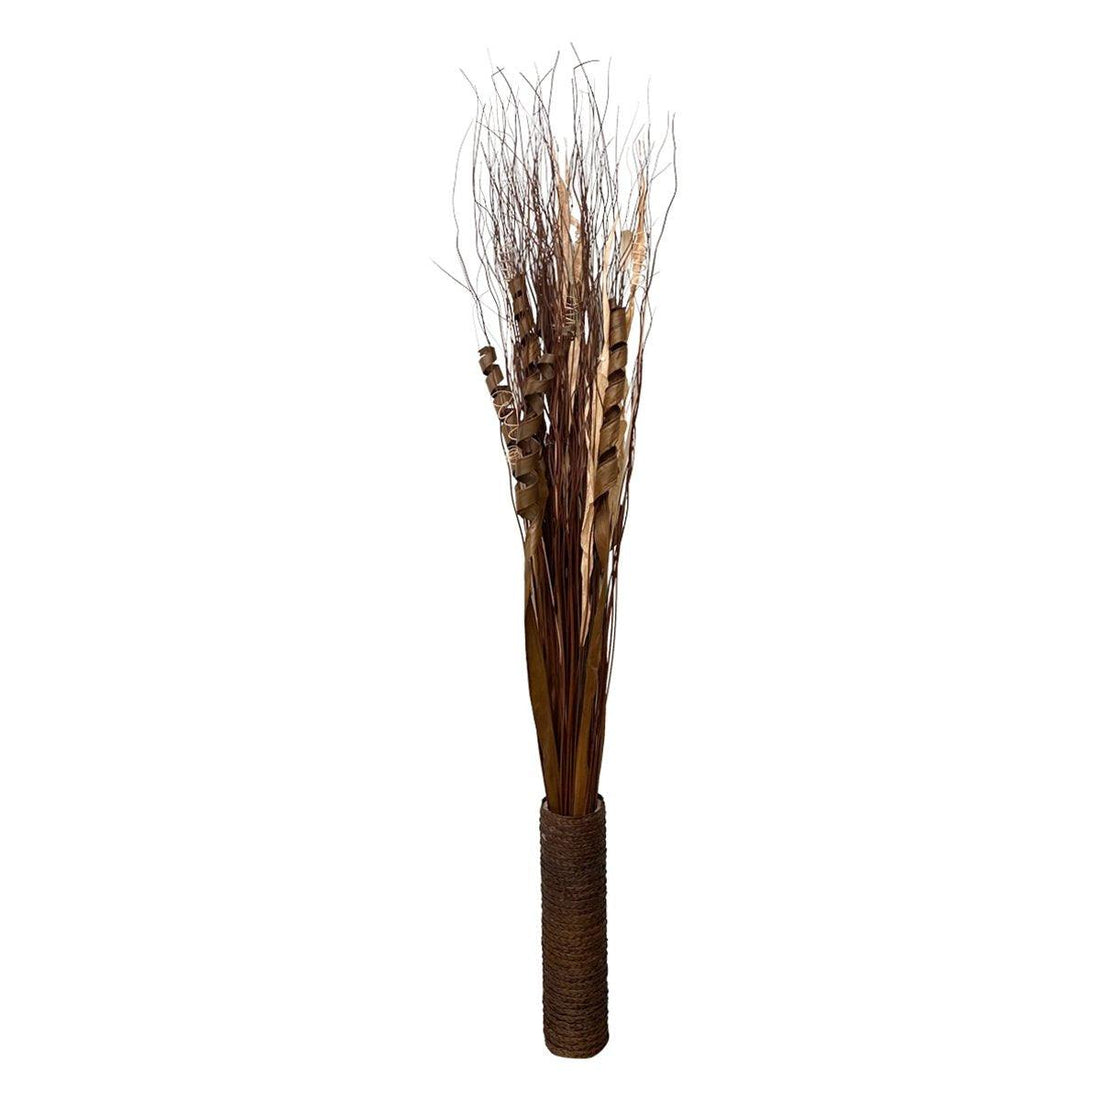 Assorted Leaves & Grasses In A Woven Brown Pot 150cm - £59.99 - Flower Sprays 